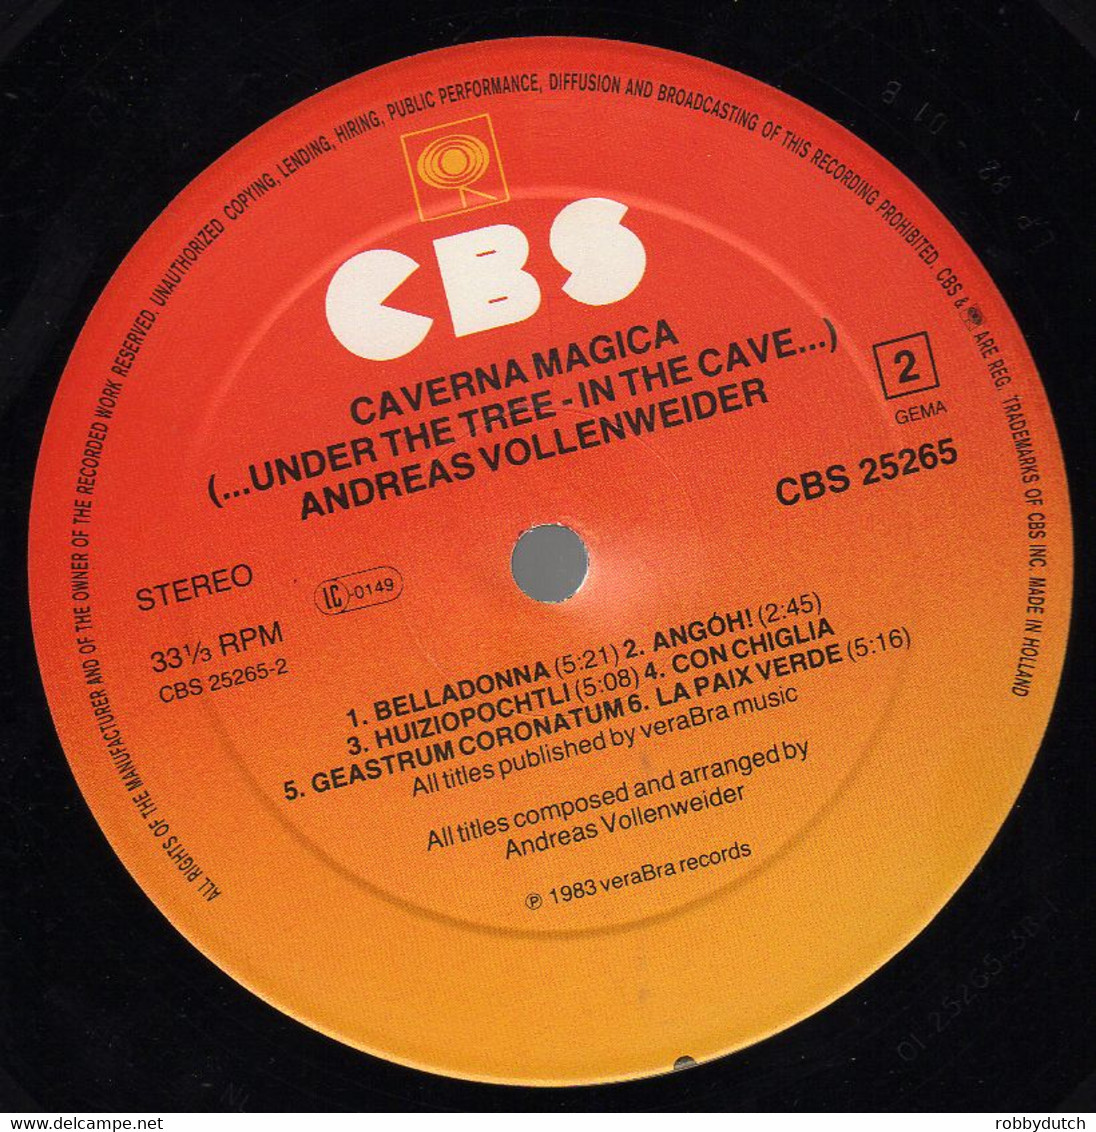 Instrumental * LP ANDREAS VOLLENWEIDER - CAVERNA MAGICA THE TREE - IN THE CAVE...)